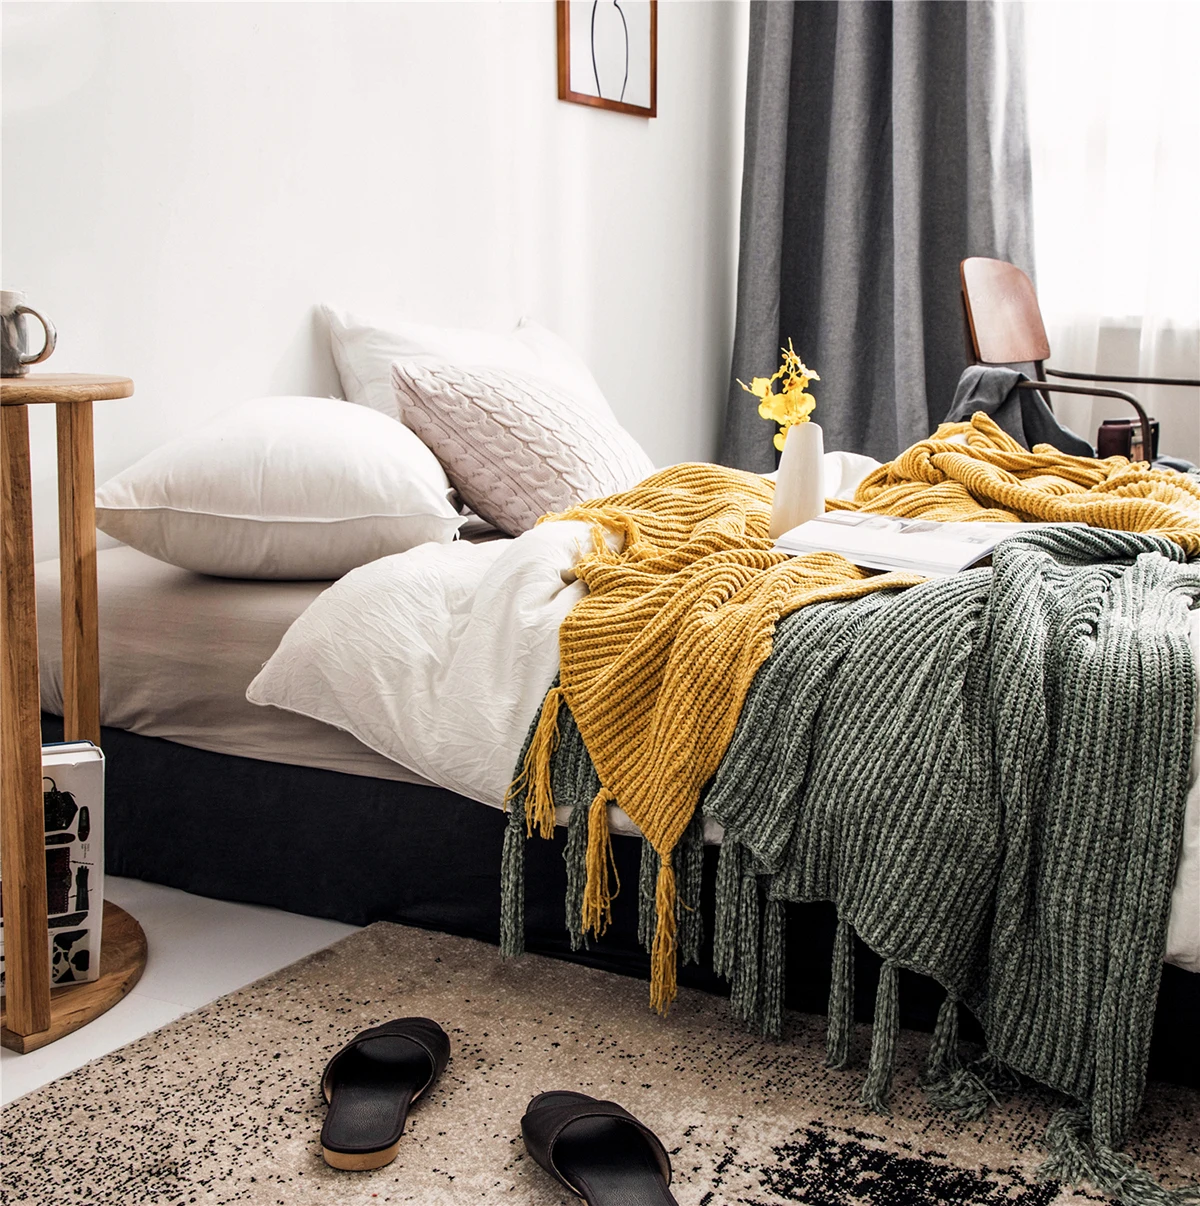 Inyahome Bedspread Bed Car Nordic Tassels Knitted Blankets Fashion Fringe Cozy Warm Elegant Causal Plaids Farmhouse Decorative